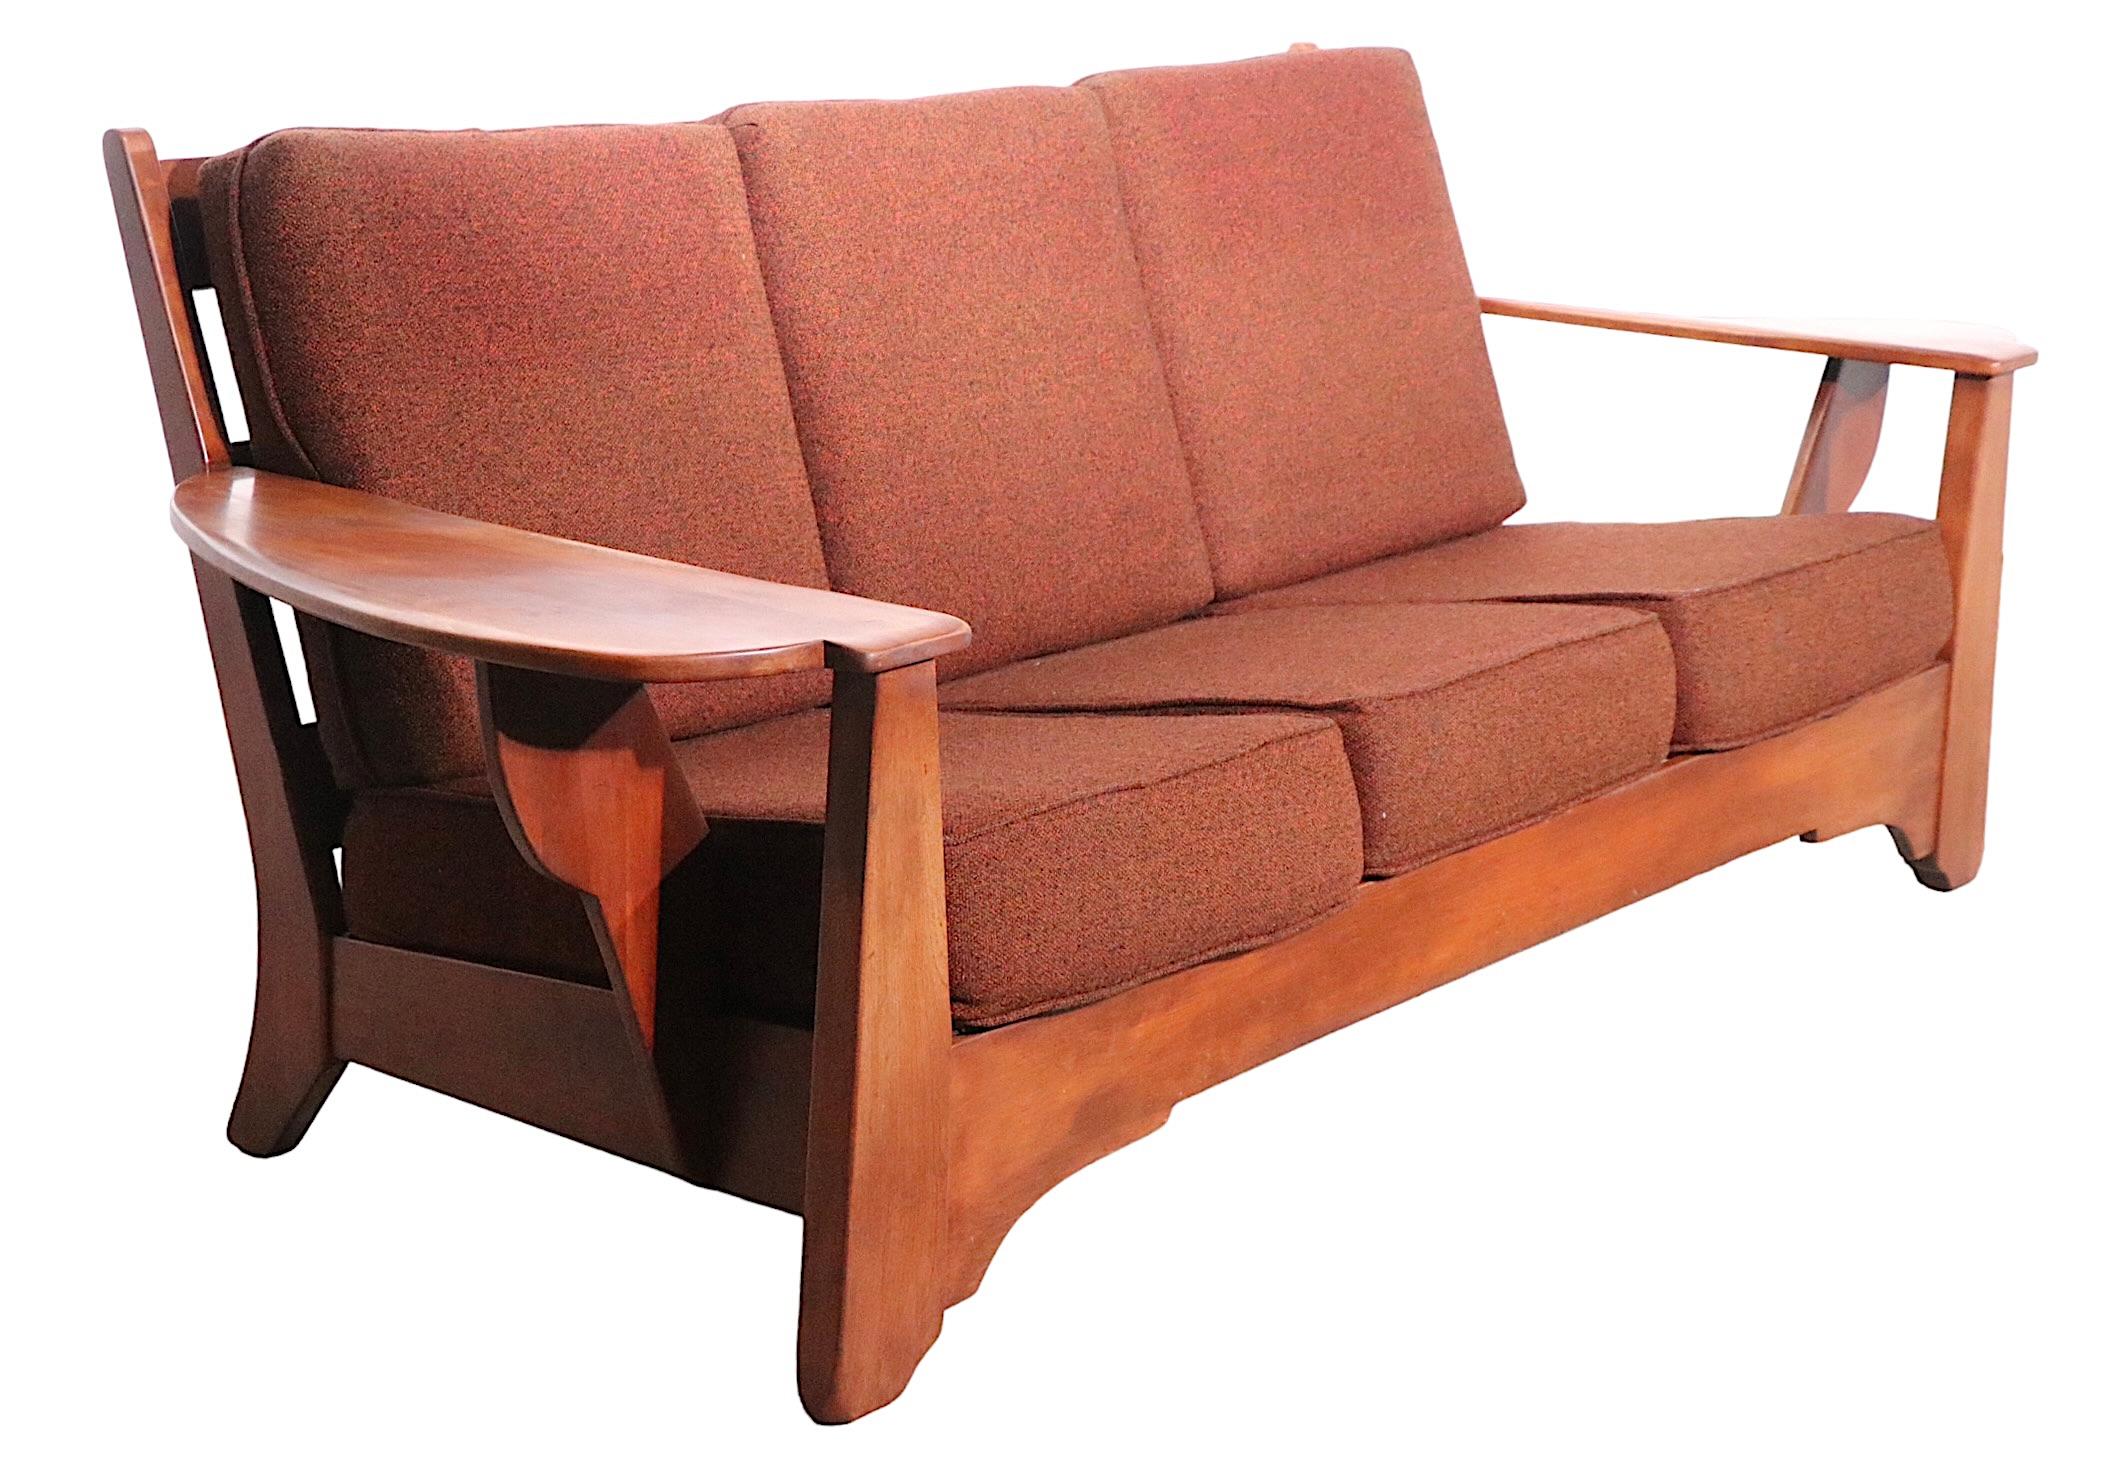 Paddle Arm Cushman Colonial Creations Sofa designed by Herman de Vries 1940s/50s 3